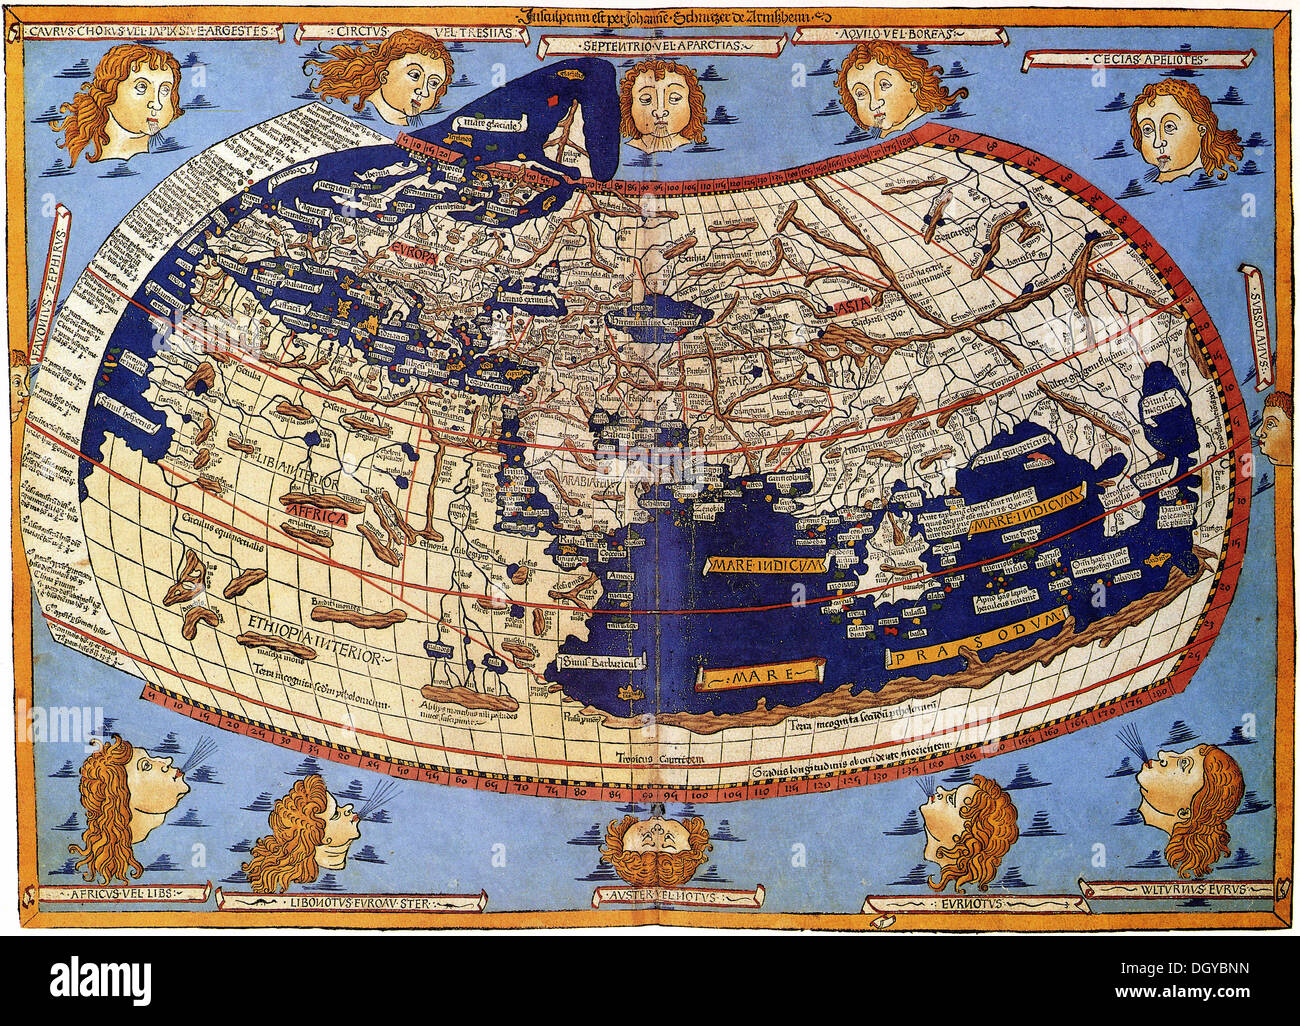 5768. Ptolemy’s world map showing the lands known to the Helenic world in the 2nd. C. The original manuscript was lost, pic. shows a 13th. C. reconstruction. Stock Photo